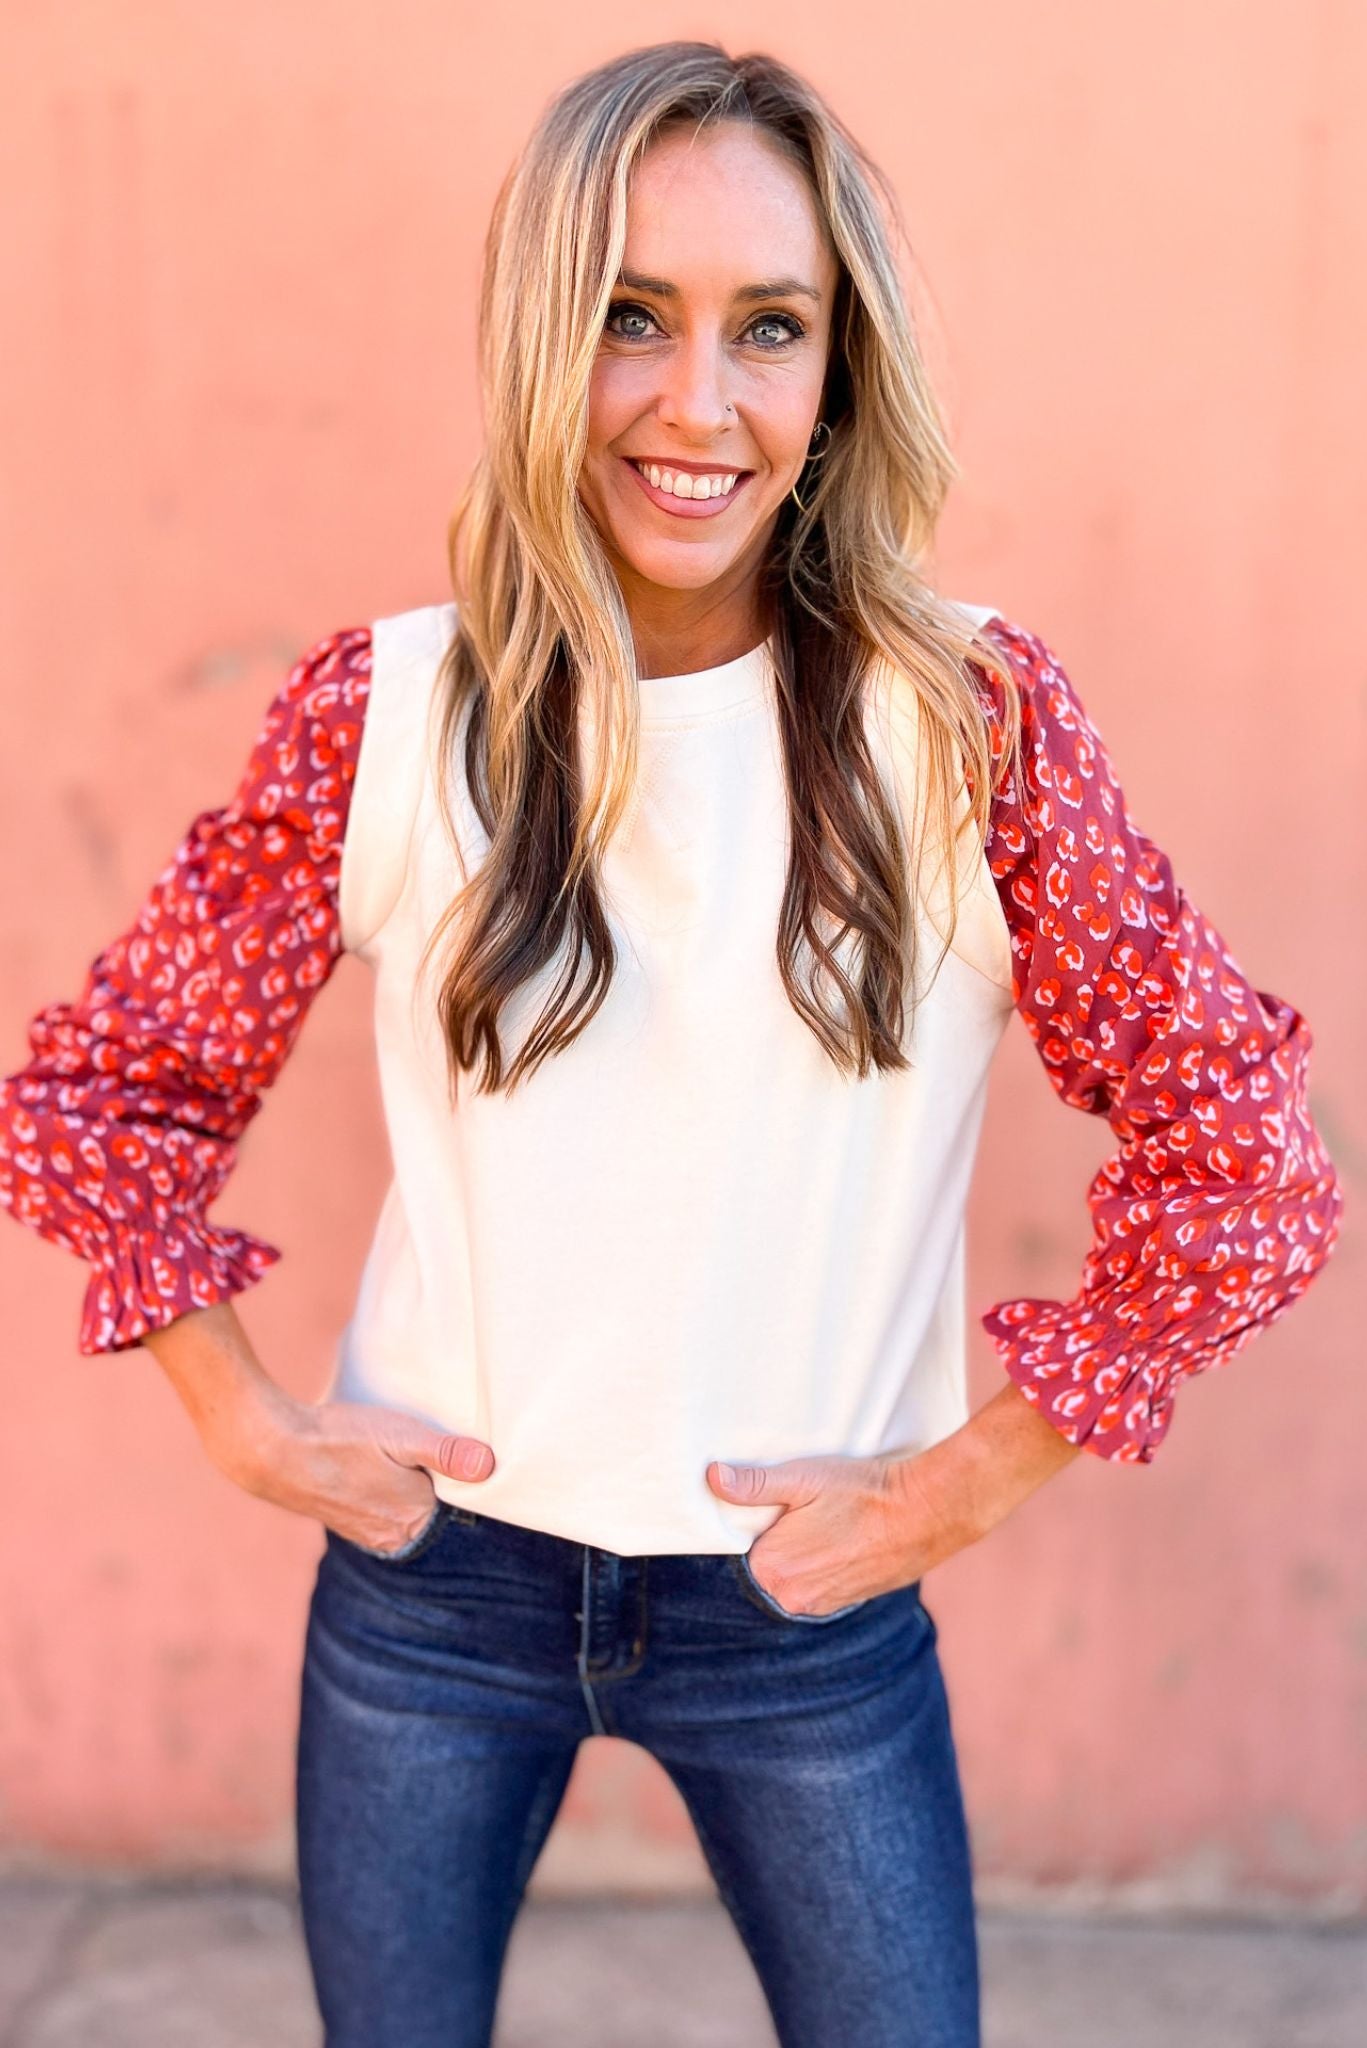 Load image into Gallery viewer, Cream Sweatshirt with Contrasting Red Animal Print Sleeves by Karlie, fall fashion, fall must have, sleeve detail, mom style, chic, shop style your senses by mallory fitzsimmons
